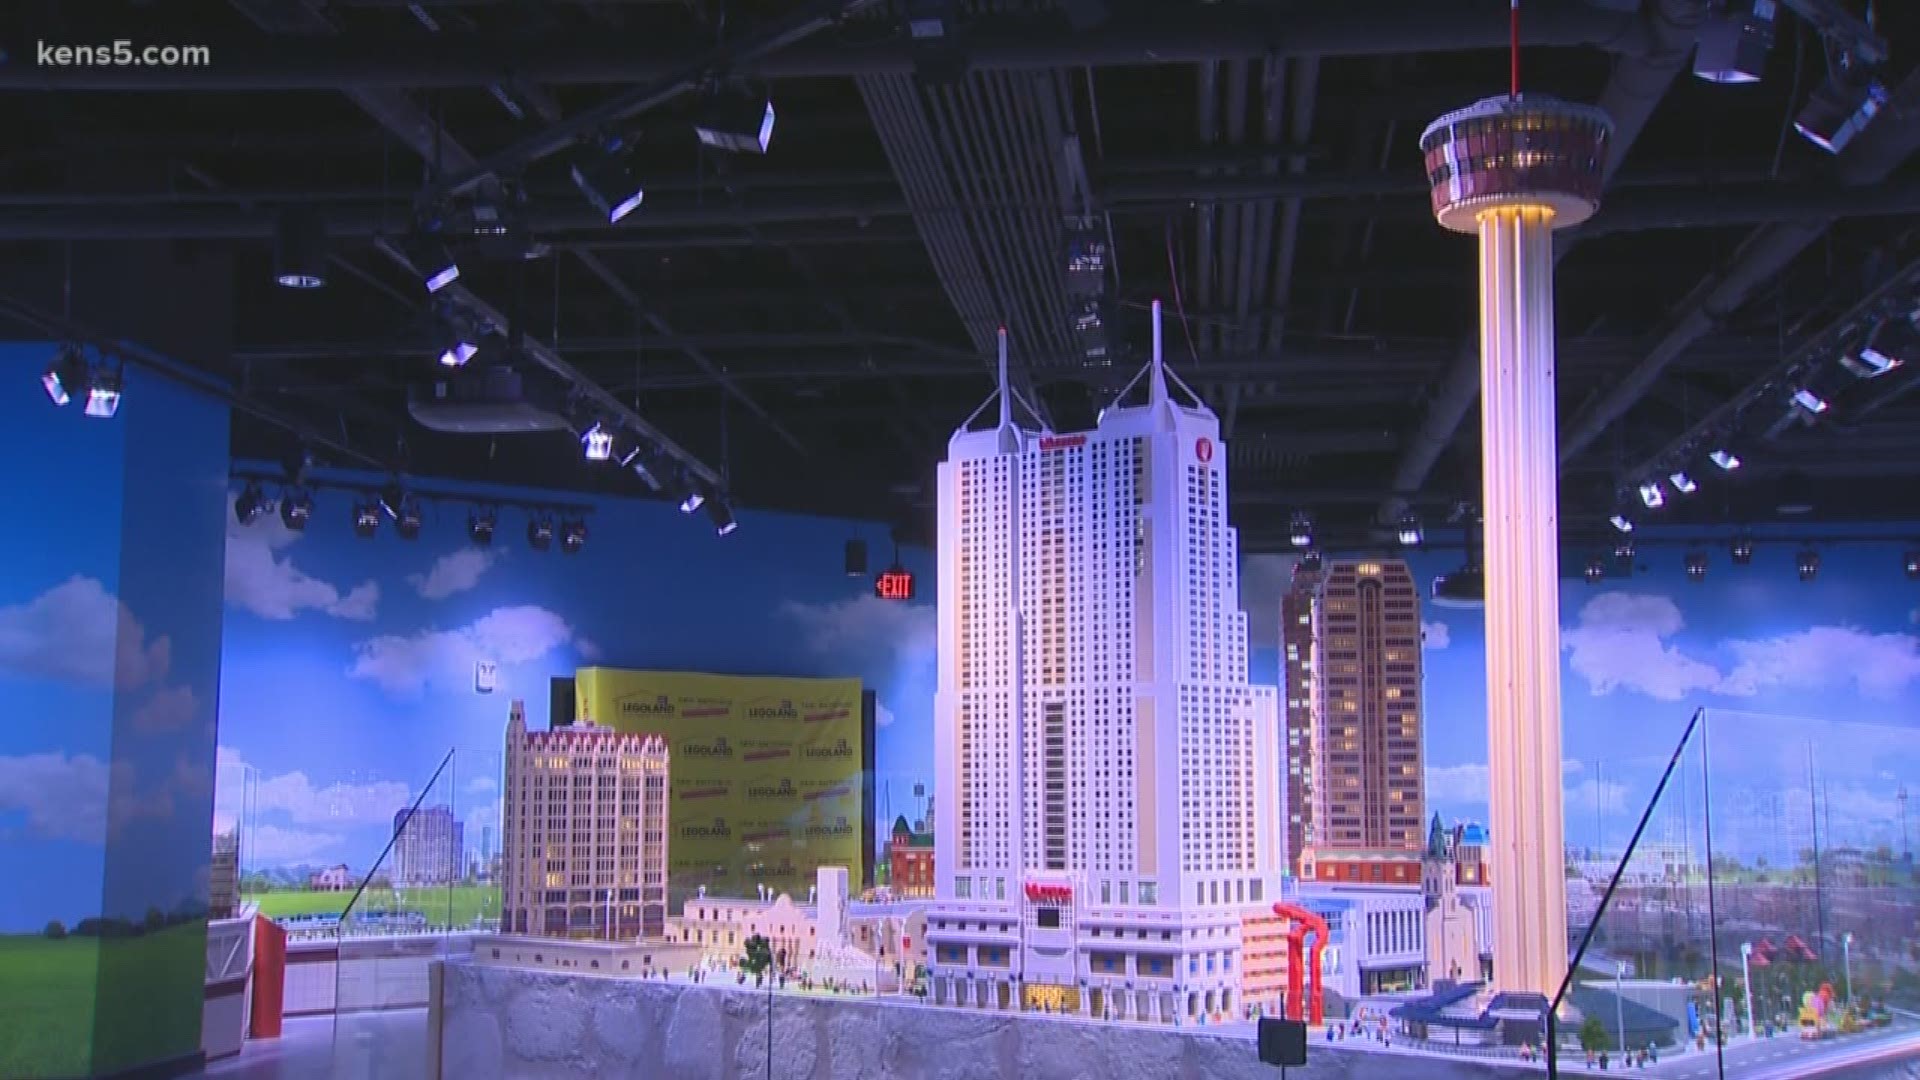 Brick by brick, San Antonio's skyline has come to life in legos. In about a week, you'll be able to see the amazing creations in person at the new LEGOLAND Discovery Center.